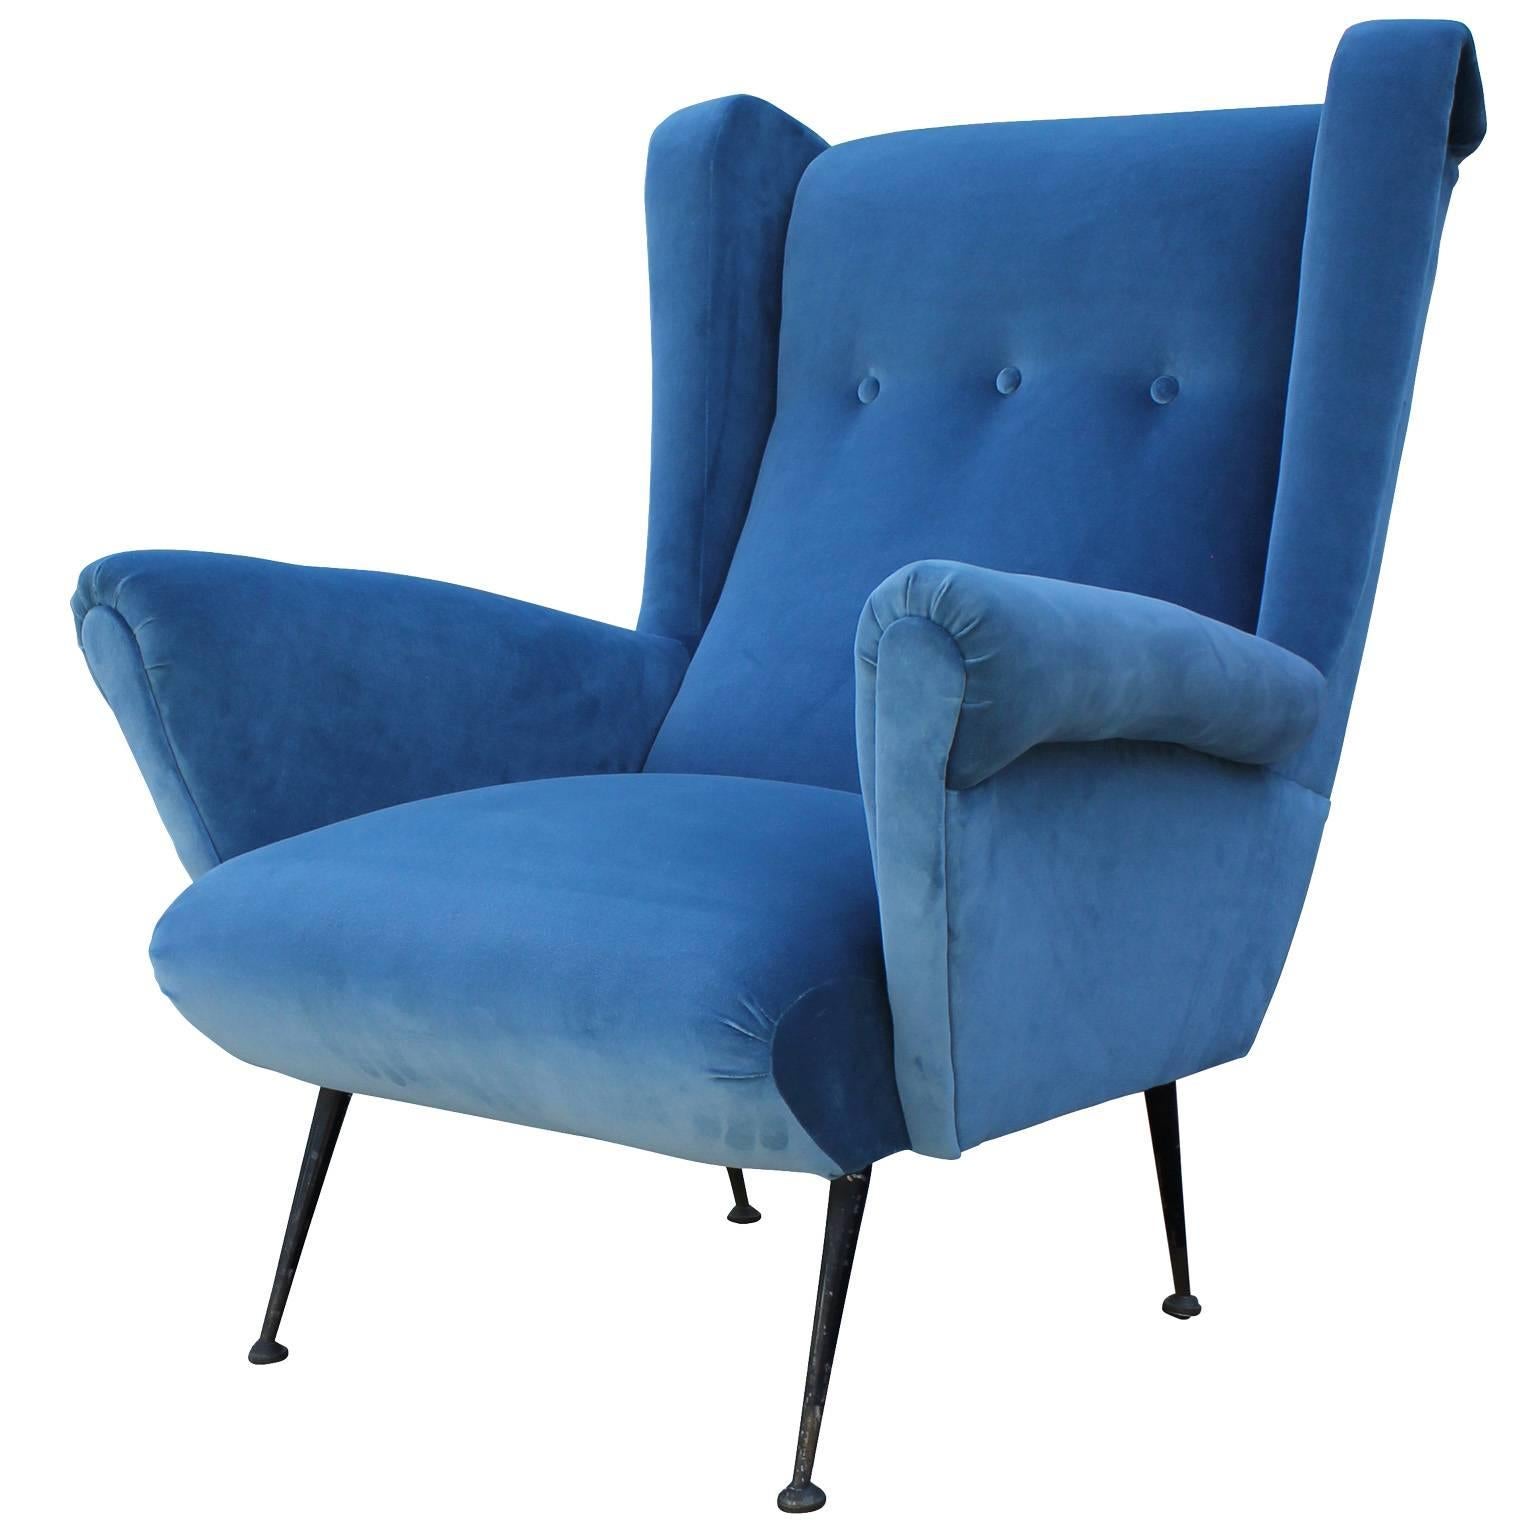 Wonderful pair of wingback lounge chairs made in Italy, circa 1950. Chairs are freshly upholstered in a soft blue velvet. Delicate black enameled legs are finished in patinated brass levelers. Stunning from all angles.